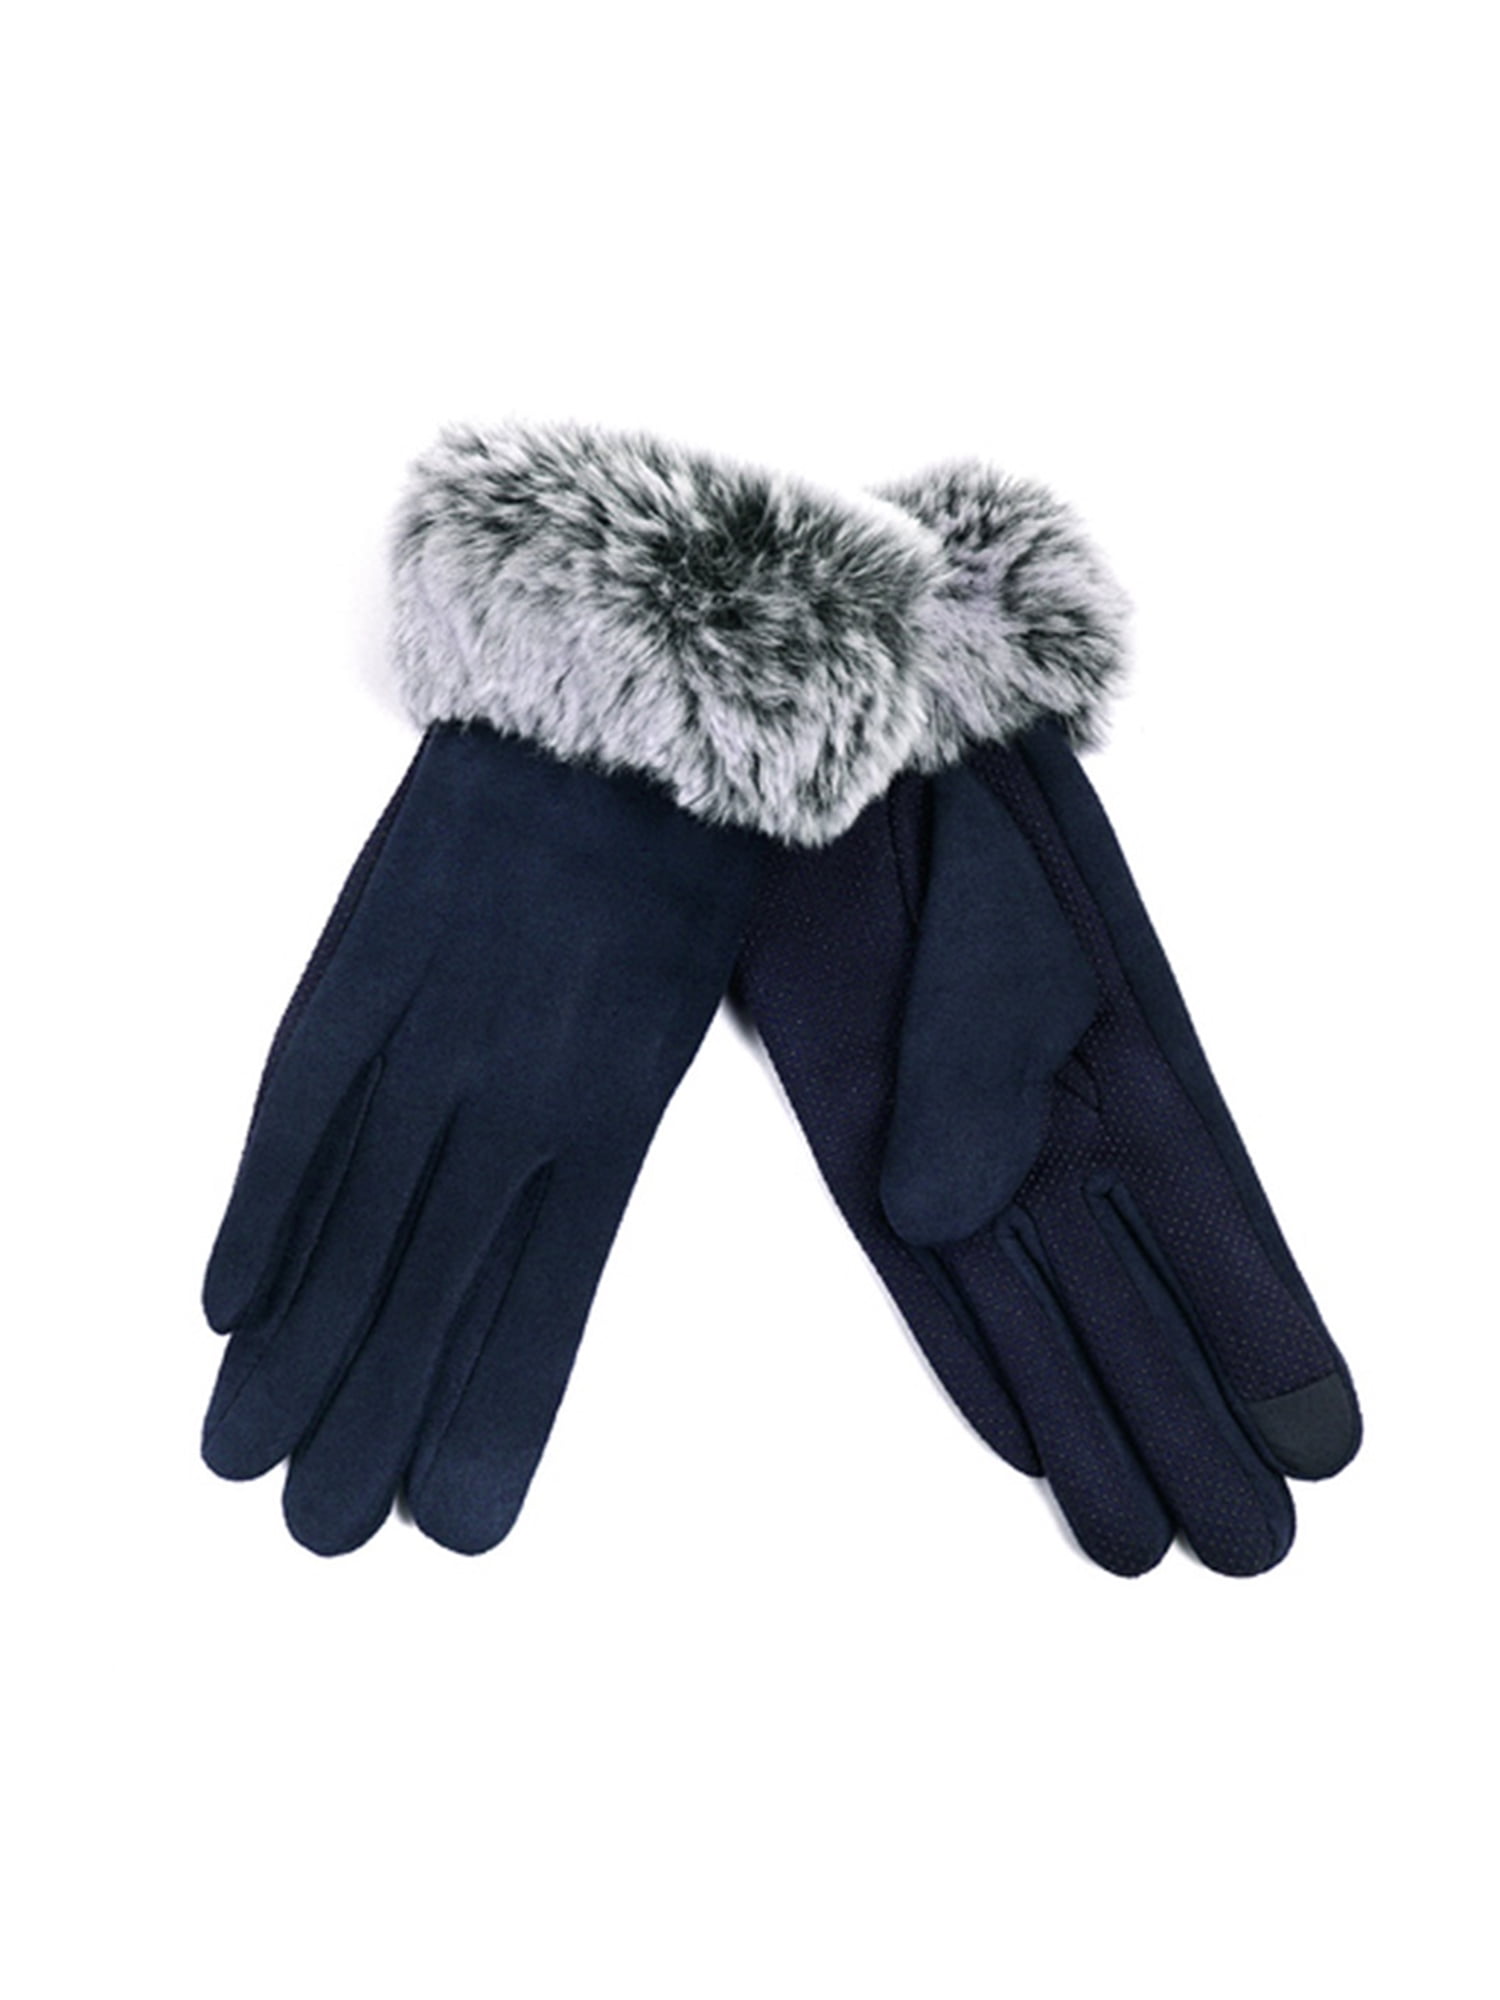 LADIES WOMENS GIRLS STYLISH ELEGANT TOUCHSCREEN GLOVES WITH FAUX FUR CUFF 